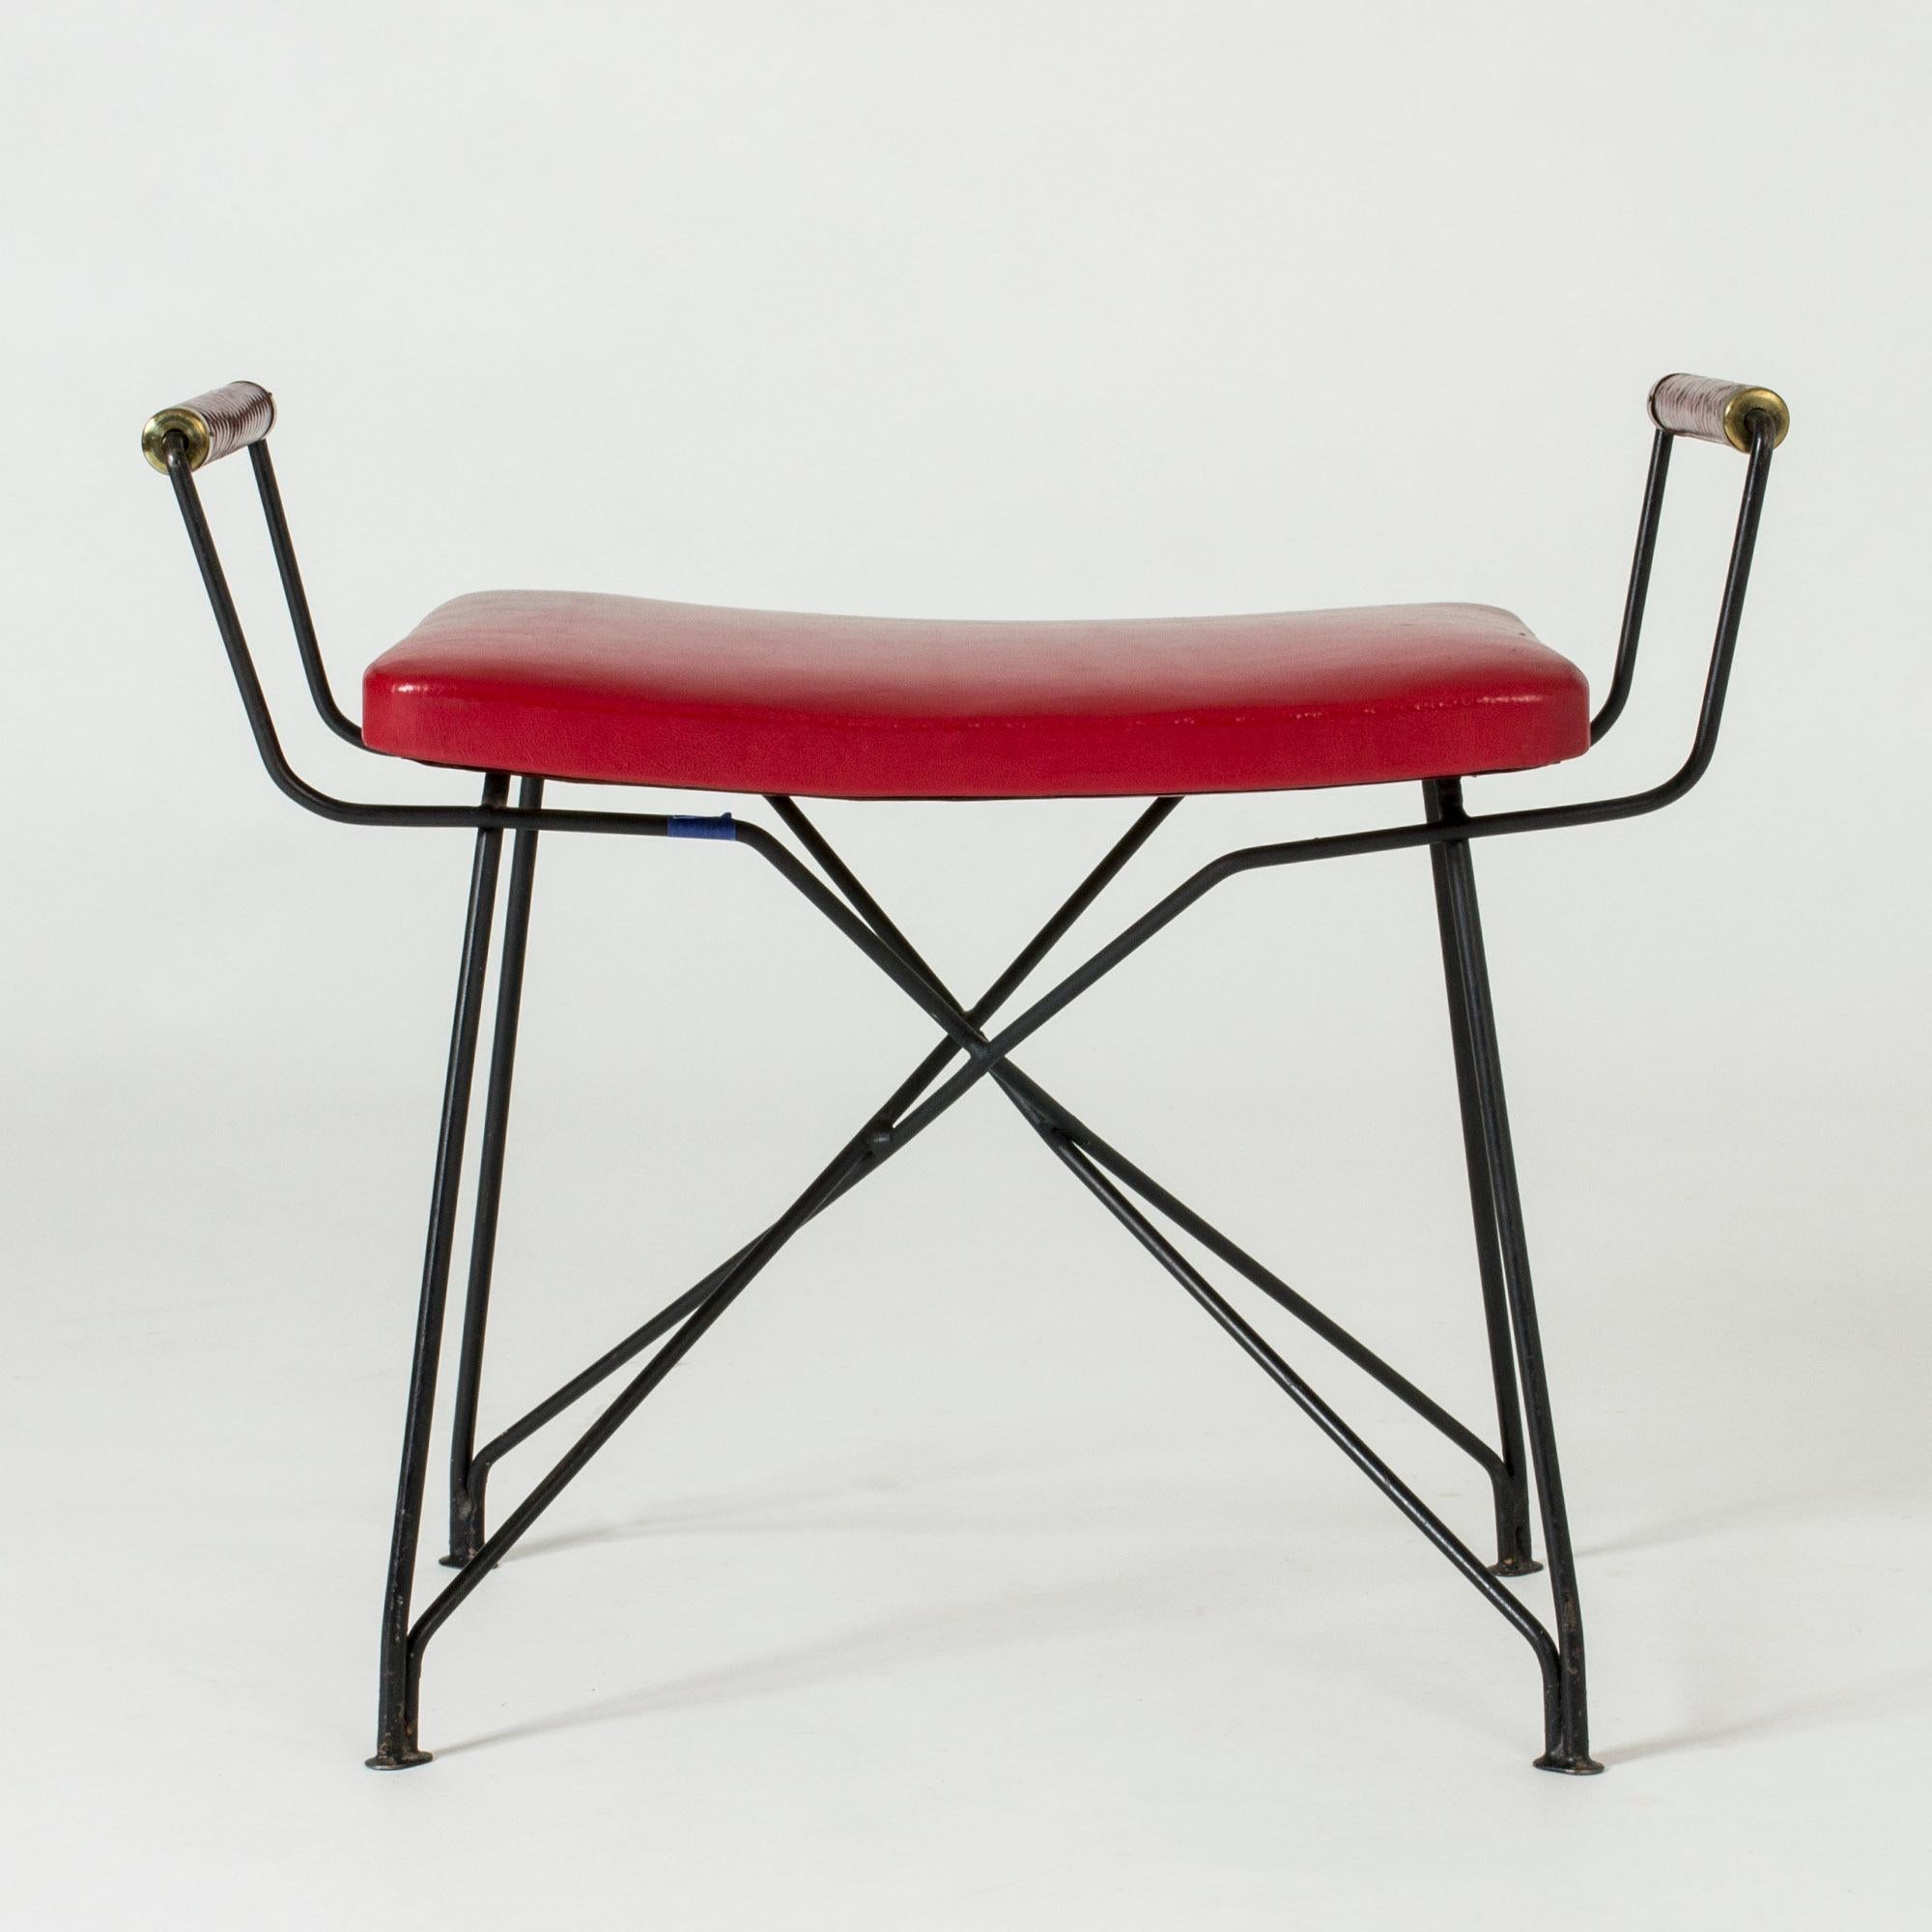 Rare leather and lacquered metal stool by Hans-Agne Jakobsson, made in his first studio in Åhus in the early 1950s. The elegant wreathed handles and the graphic lines of the legs make an enticing combination. The leather is original.